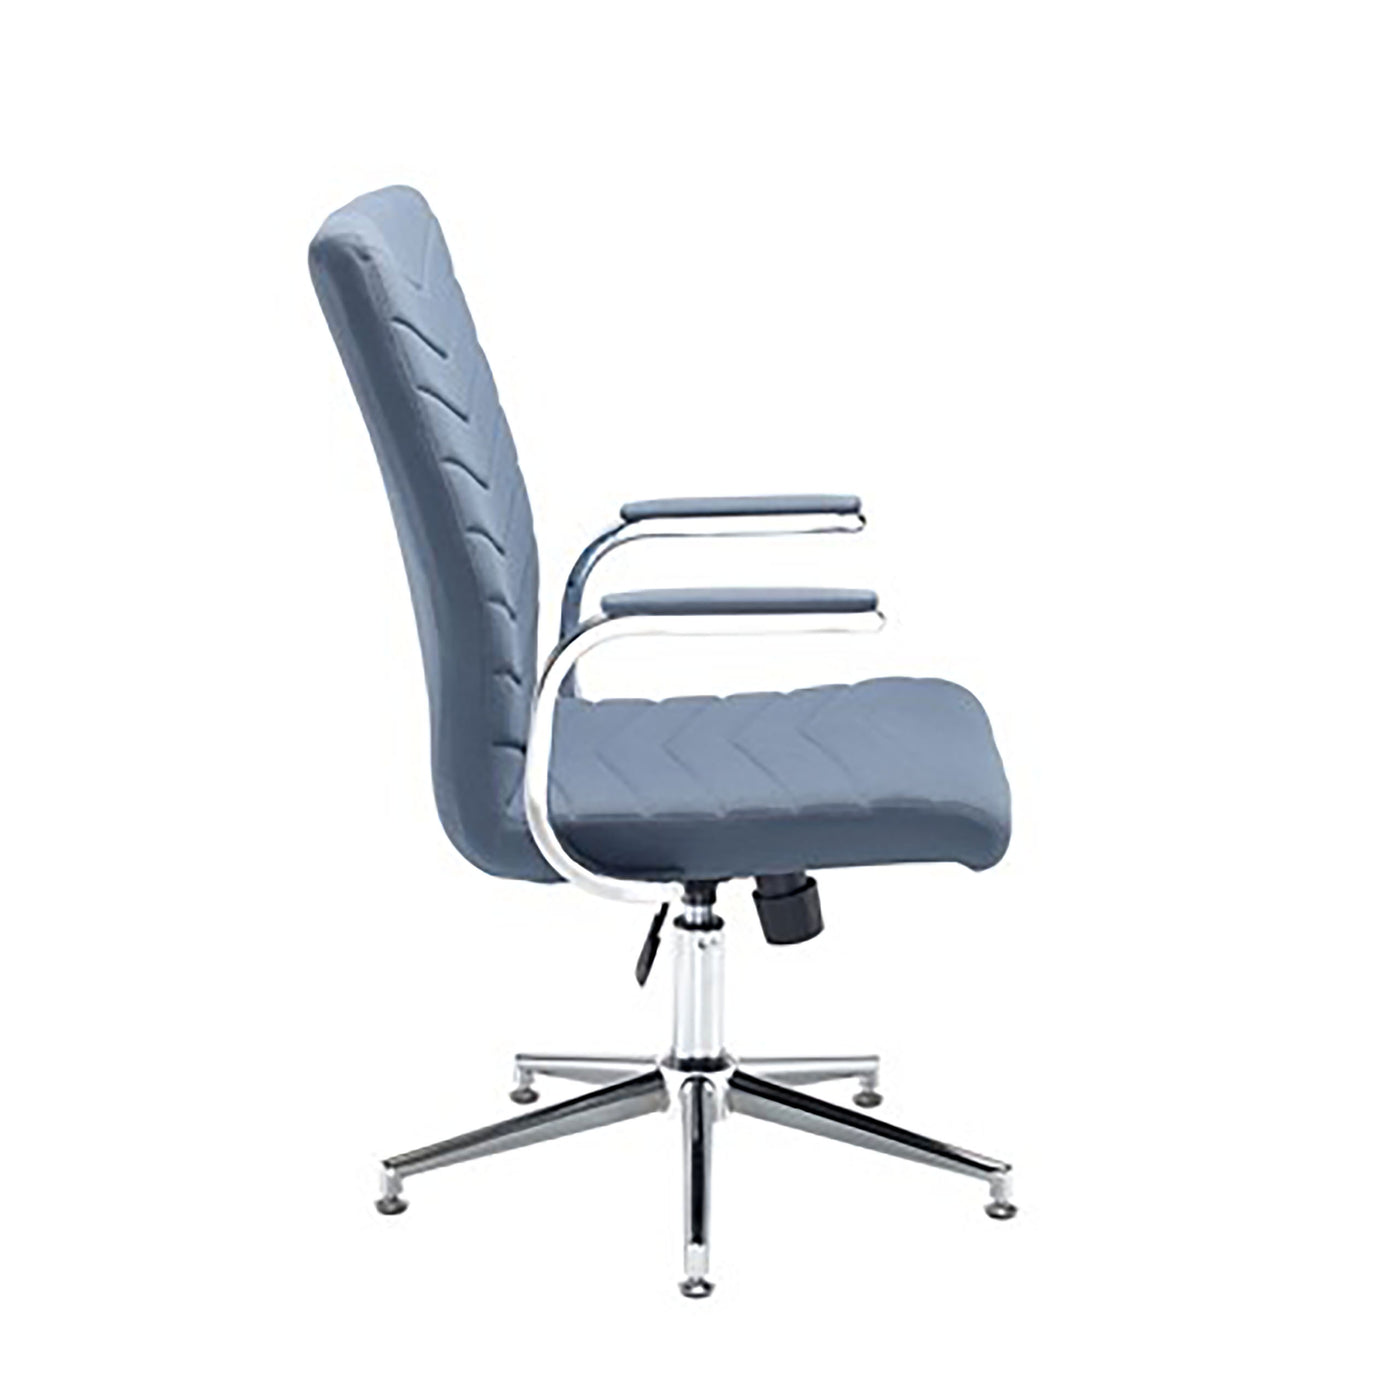 Martinez Home Office Chair | Home Office Furniture | Office Seating | Grey Fabric Leather Chair